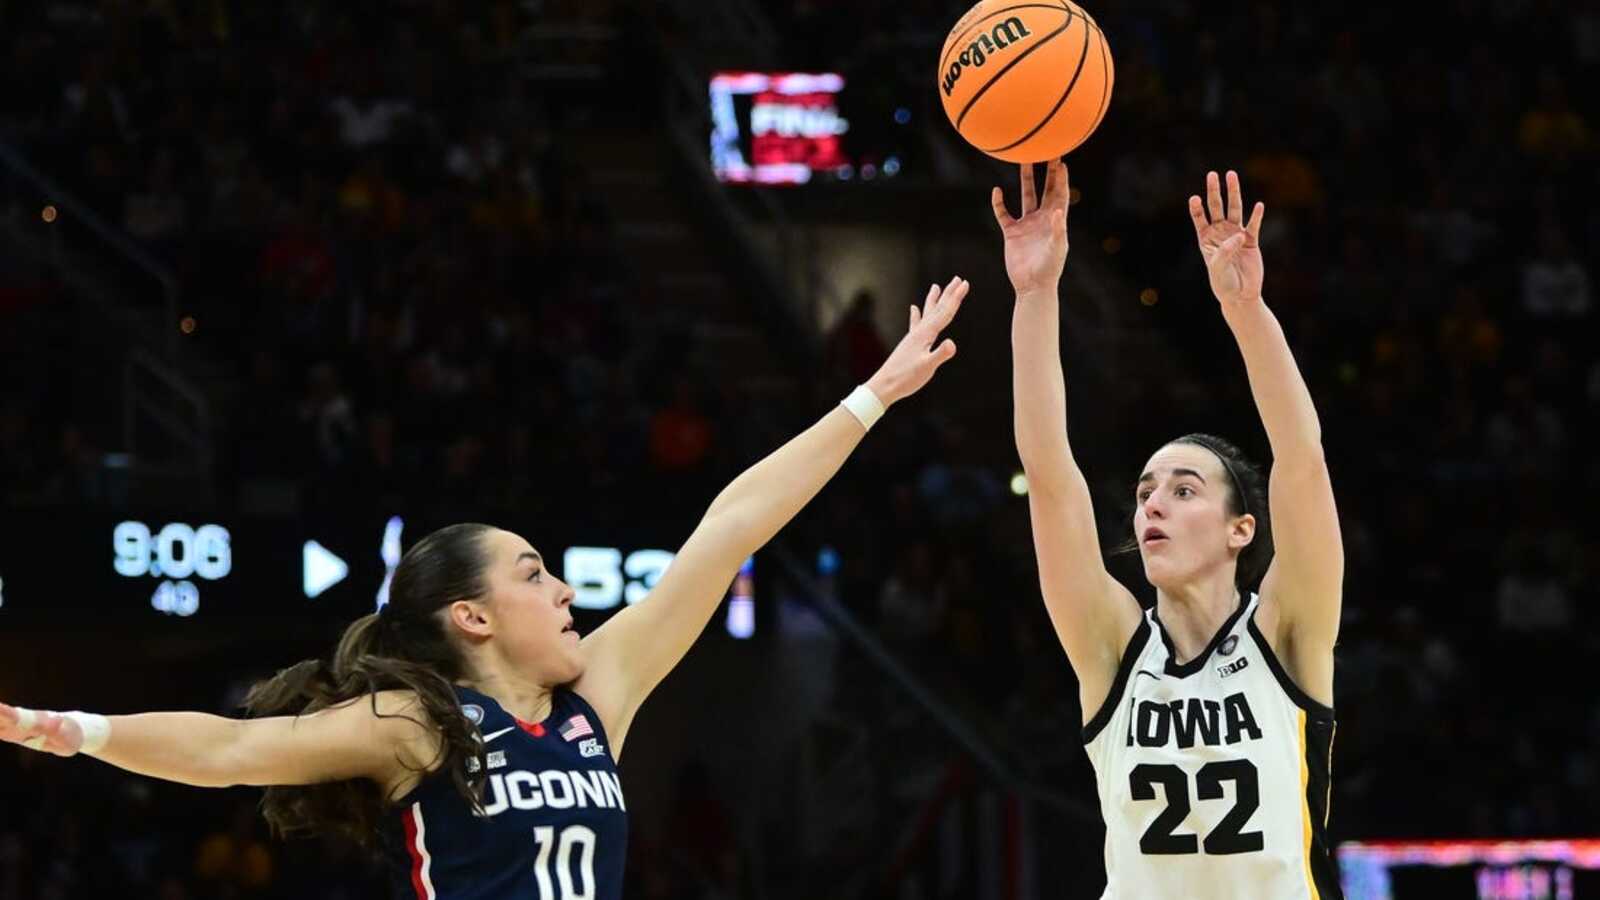 Iowa returns to NCAA final with tight win over UConn